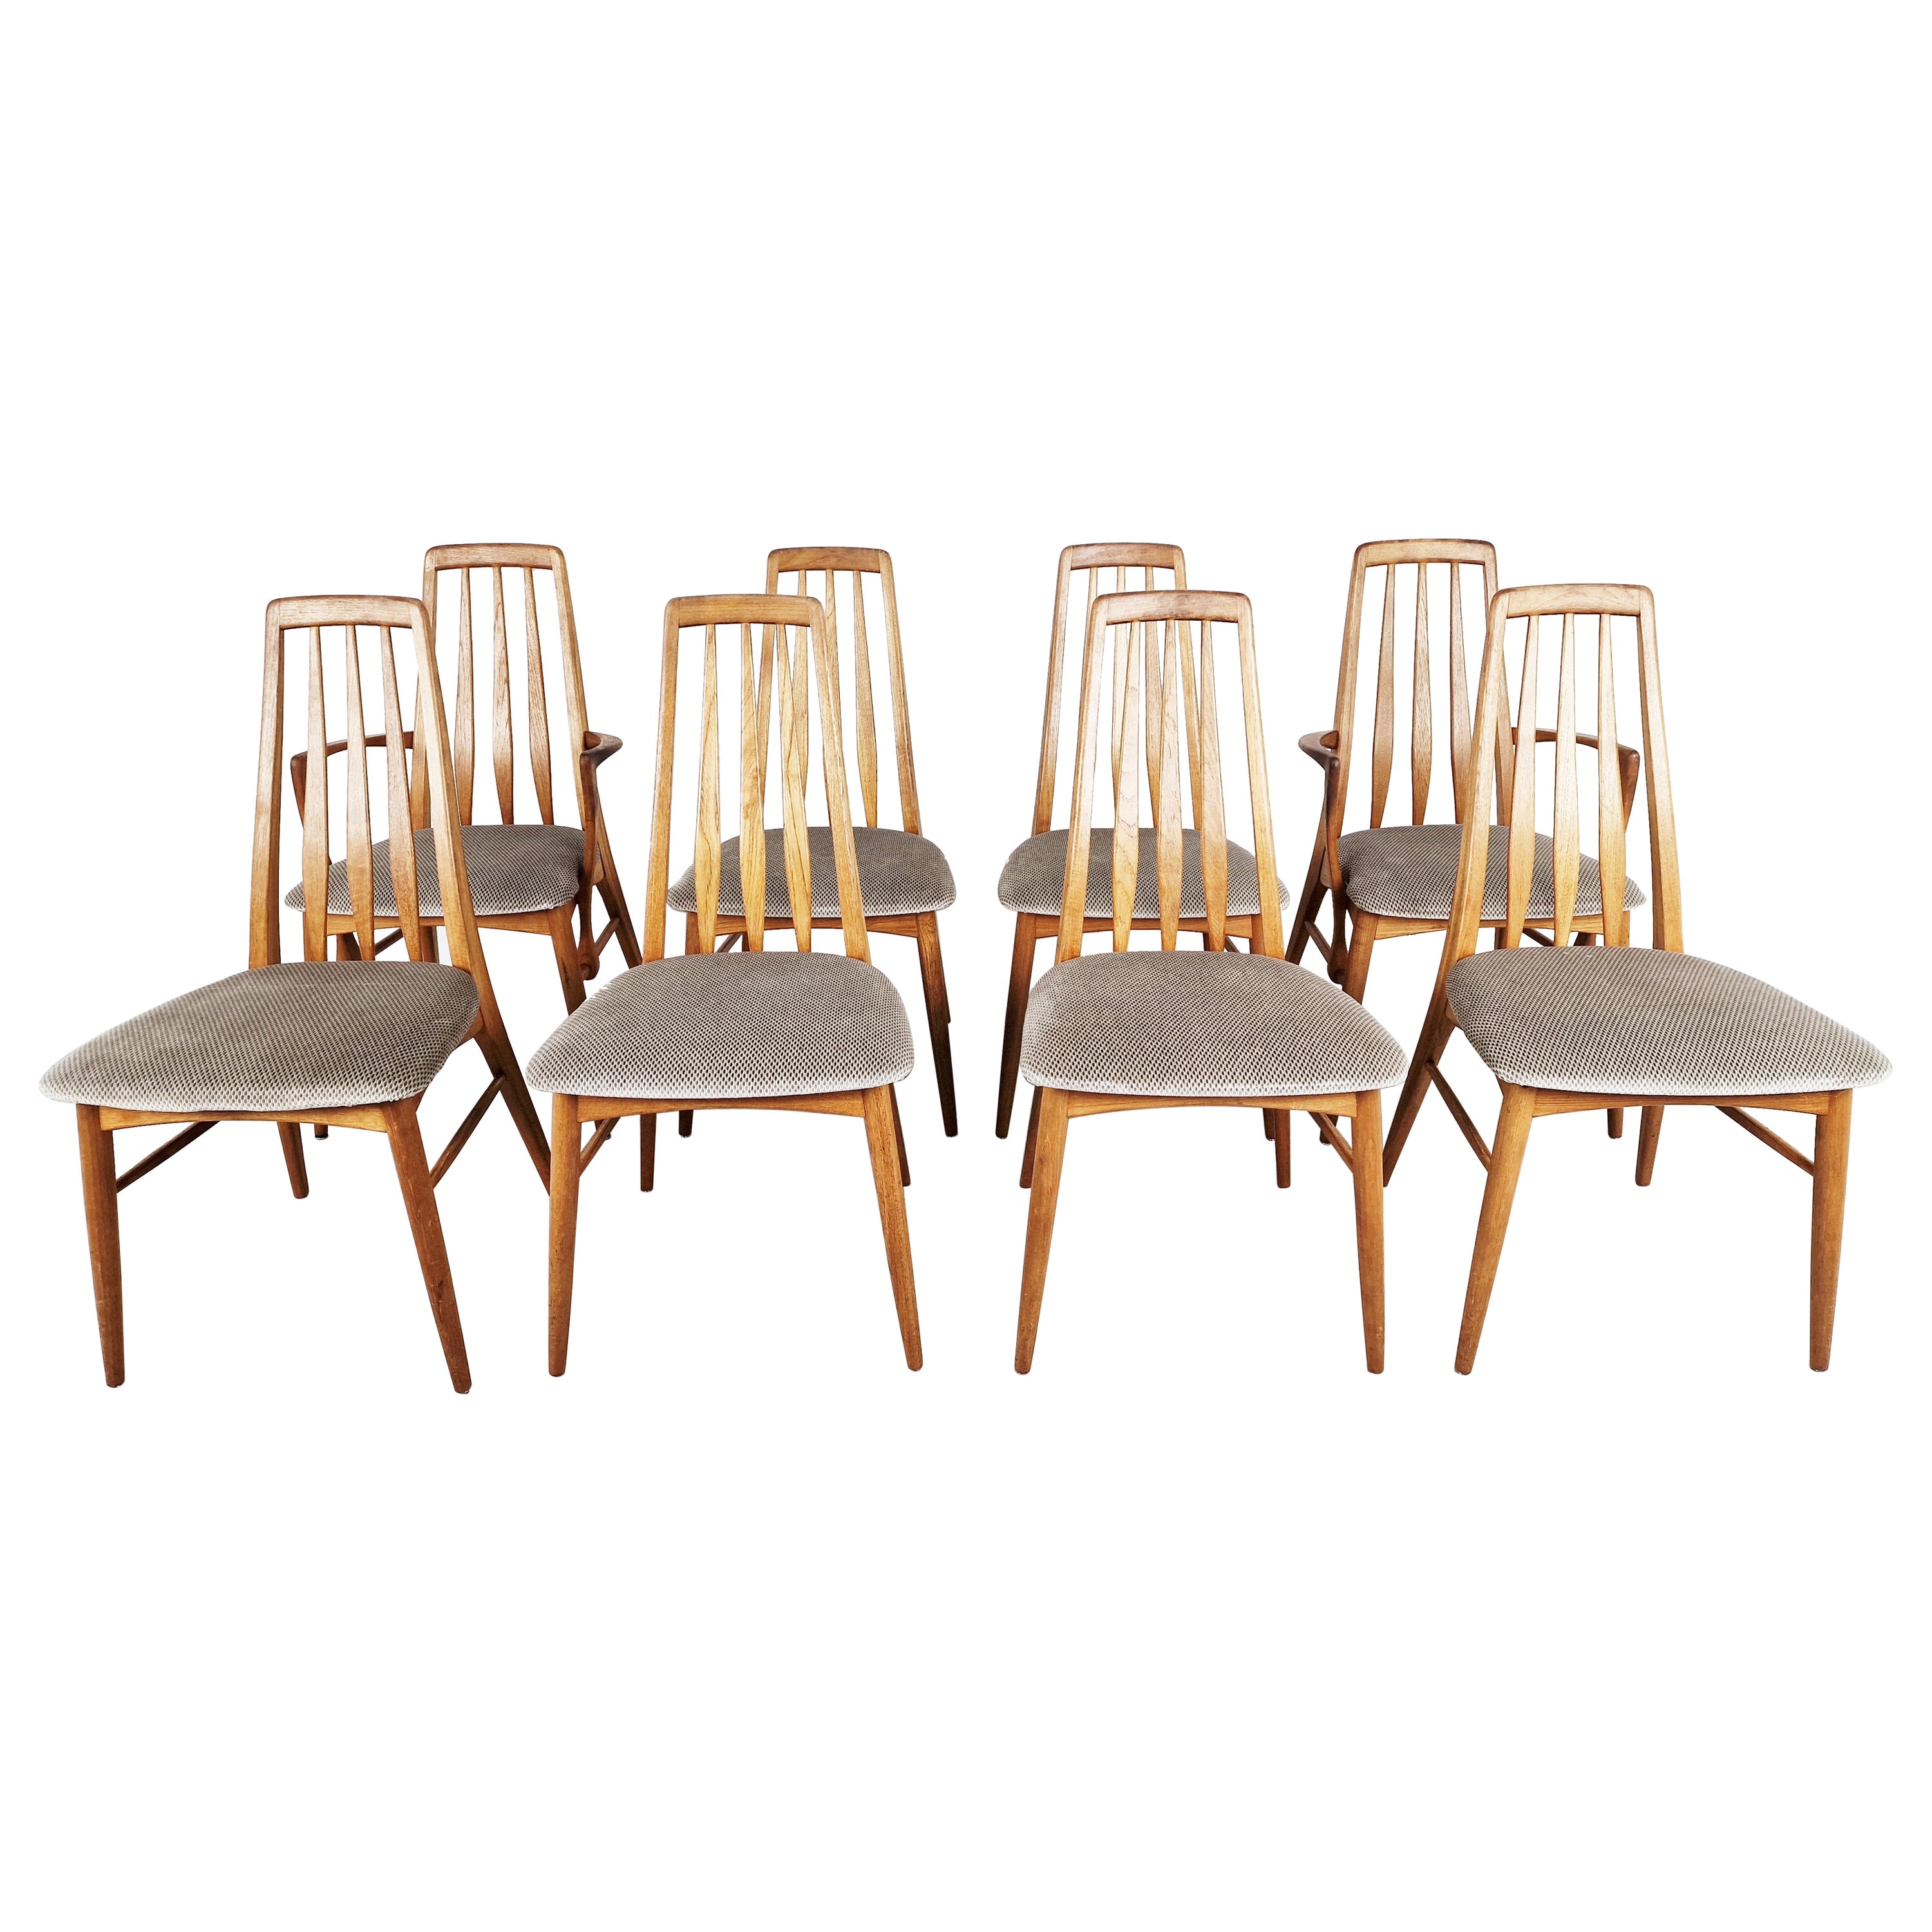 Set of 6 dining chairs, model EVA by Niels Kofoed, Denmark